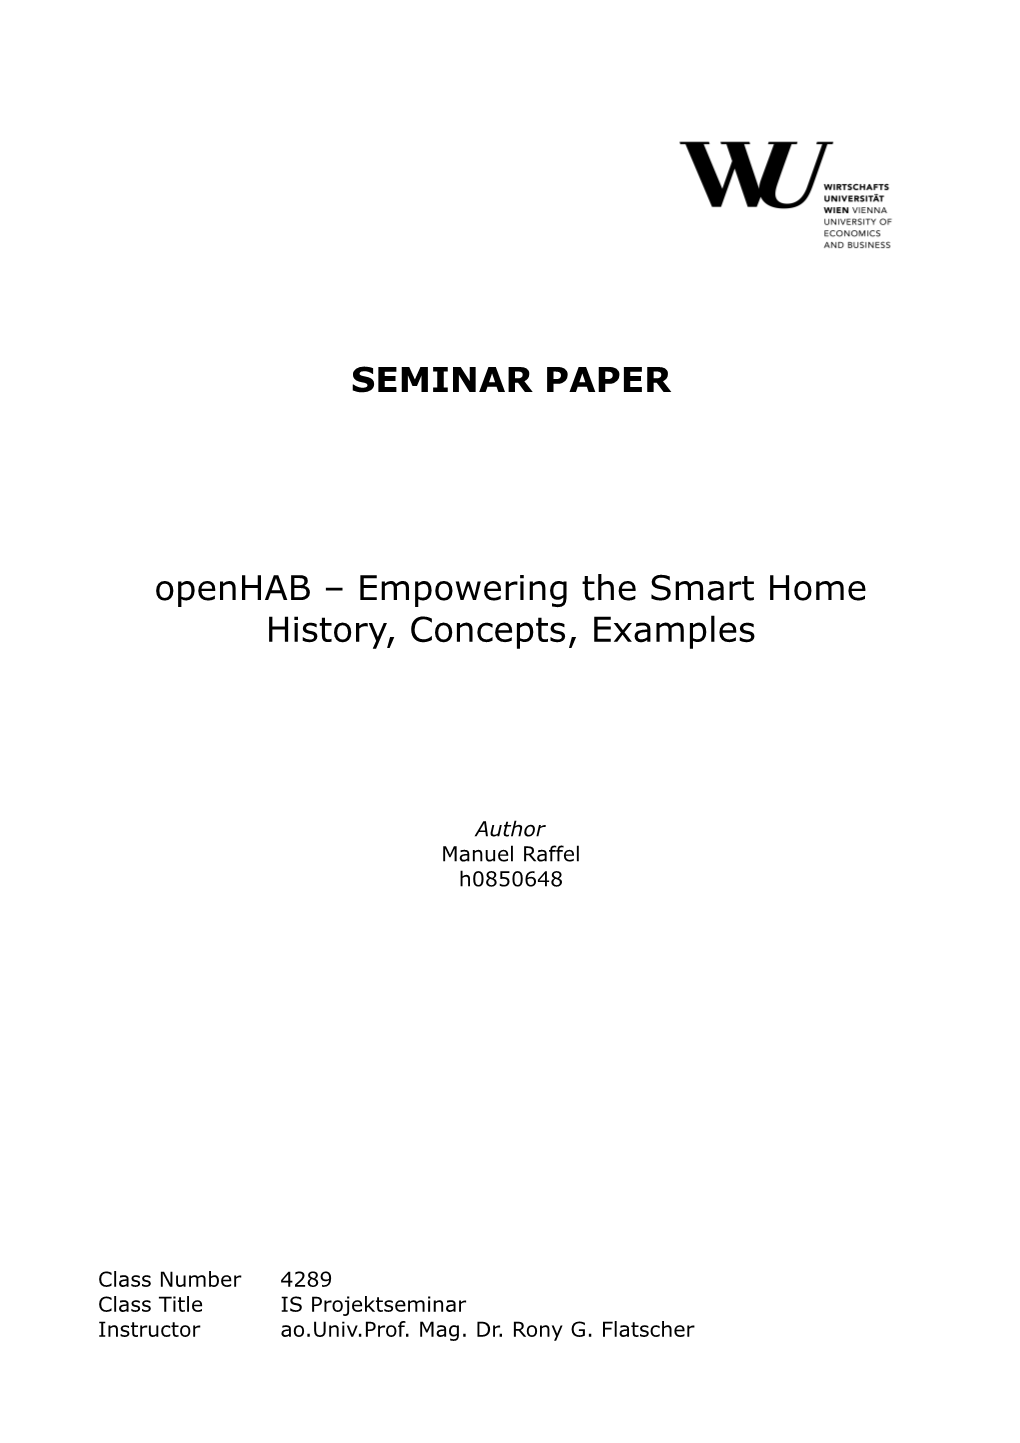 Openhab – Empowering the Smart Home History, Concepts, Examples